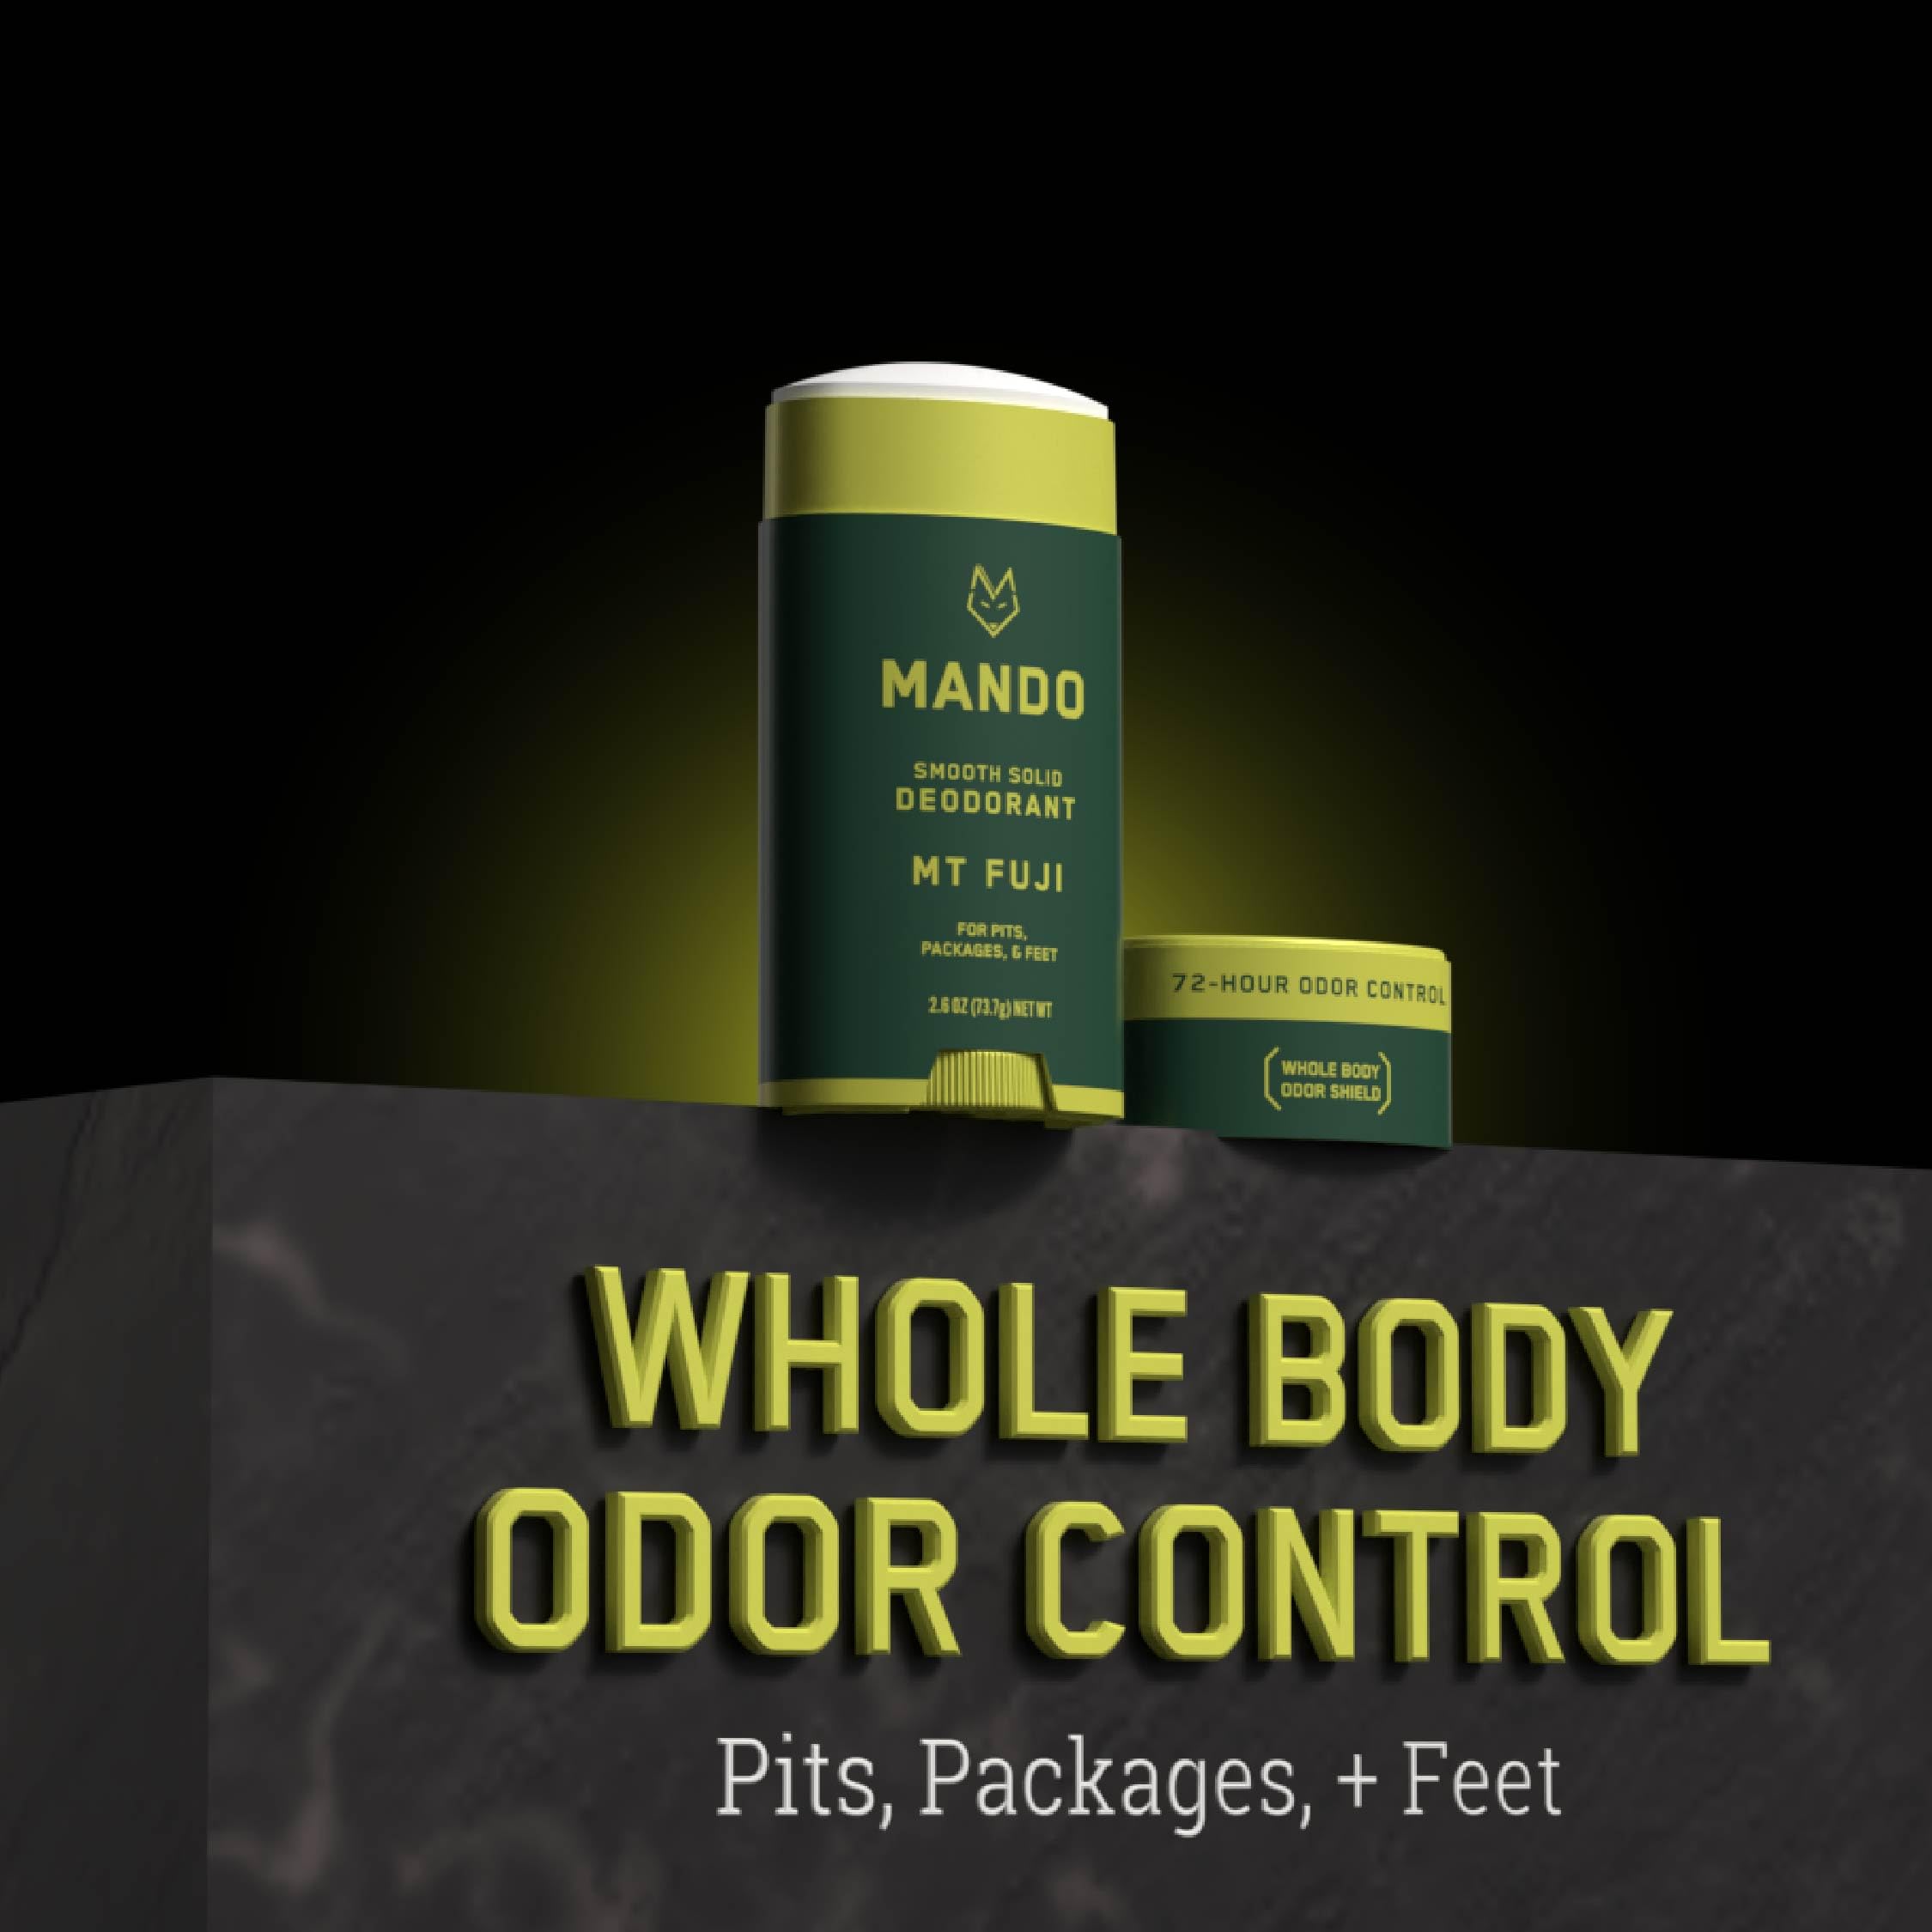 Mando Whole Body Deodorant For Men - Smooth Solid Stick - 72 Hour Odor Control - Aluminum Free, Baking Soda Free, Skin Safe - 2.6 ounce (Pack of 2) - Mt Fuji